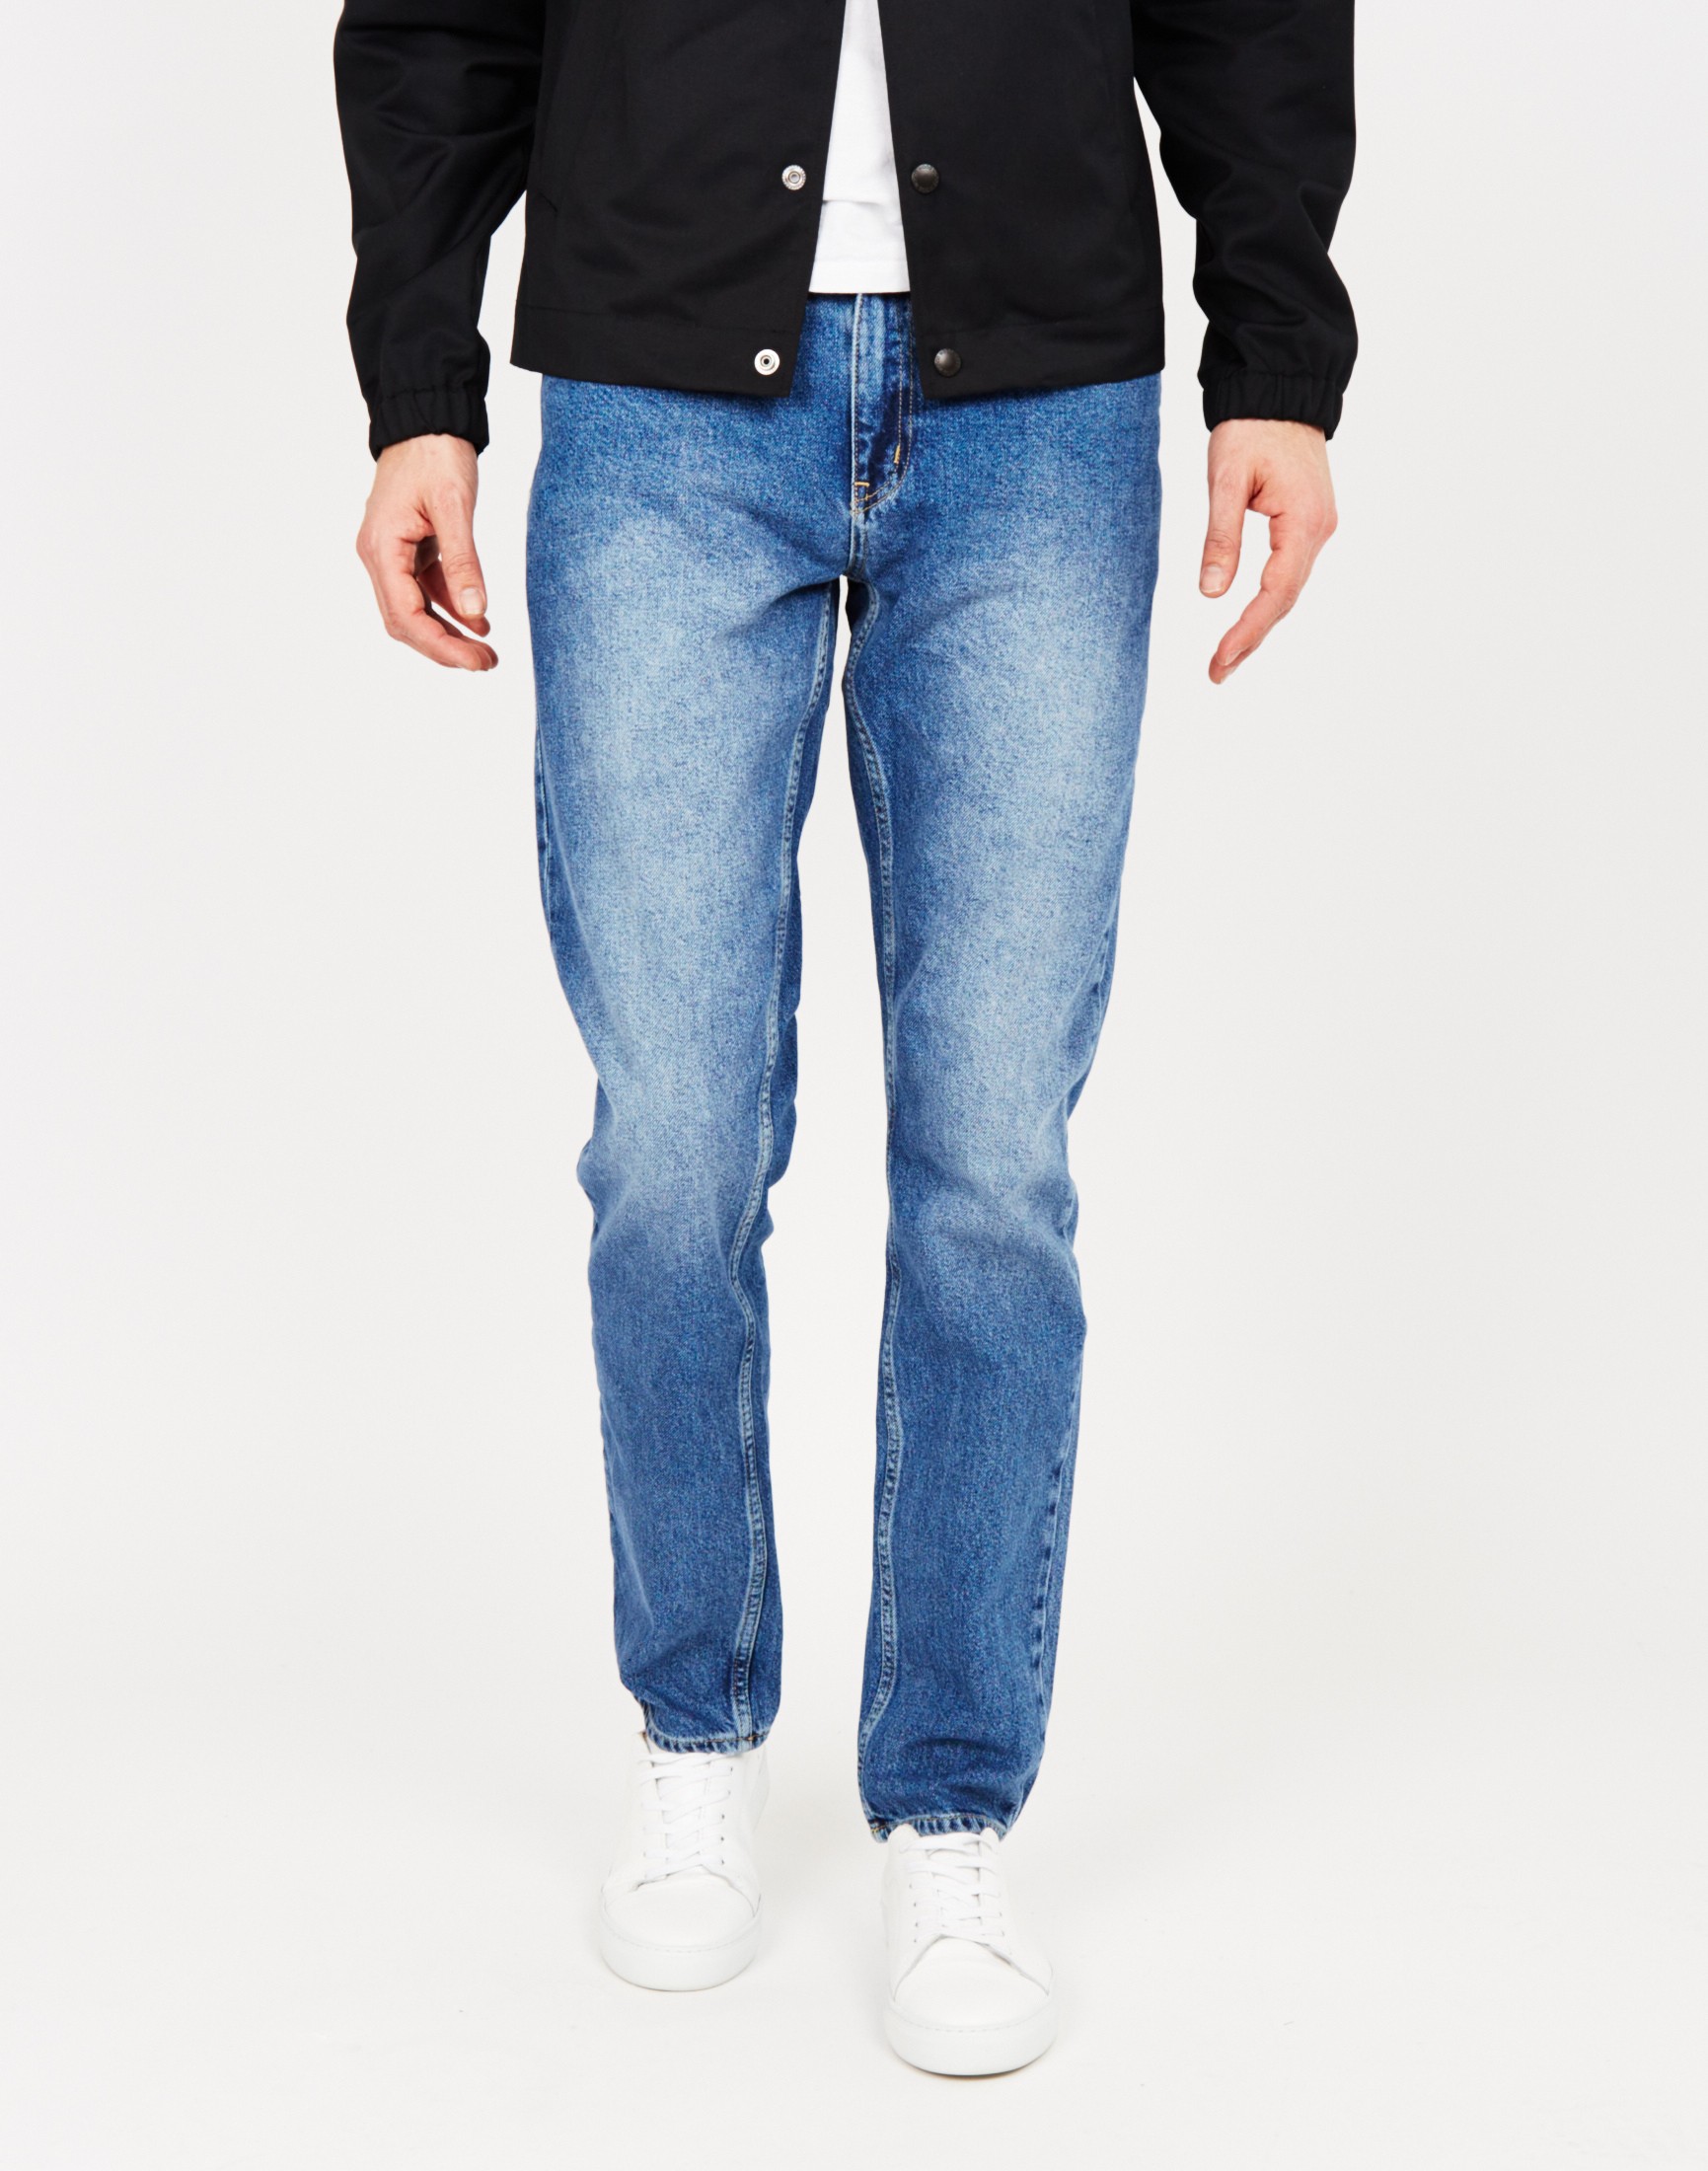 Wood Wood Wes Classic Vintage Regular Fit Jeans at The Idle Man